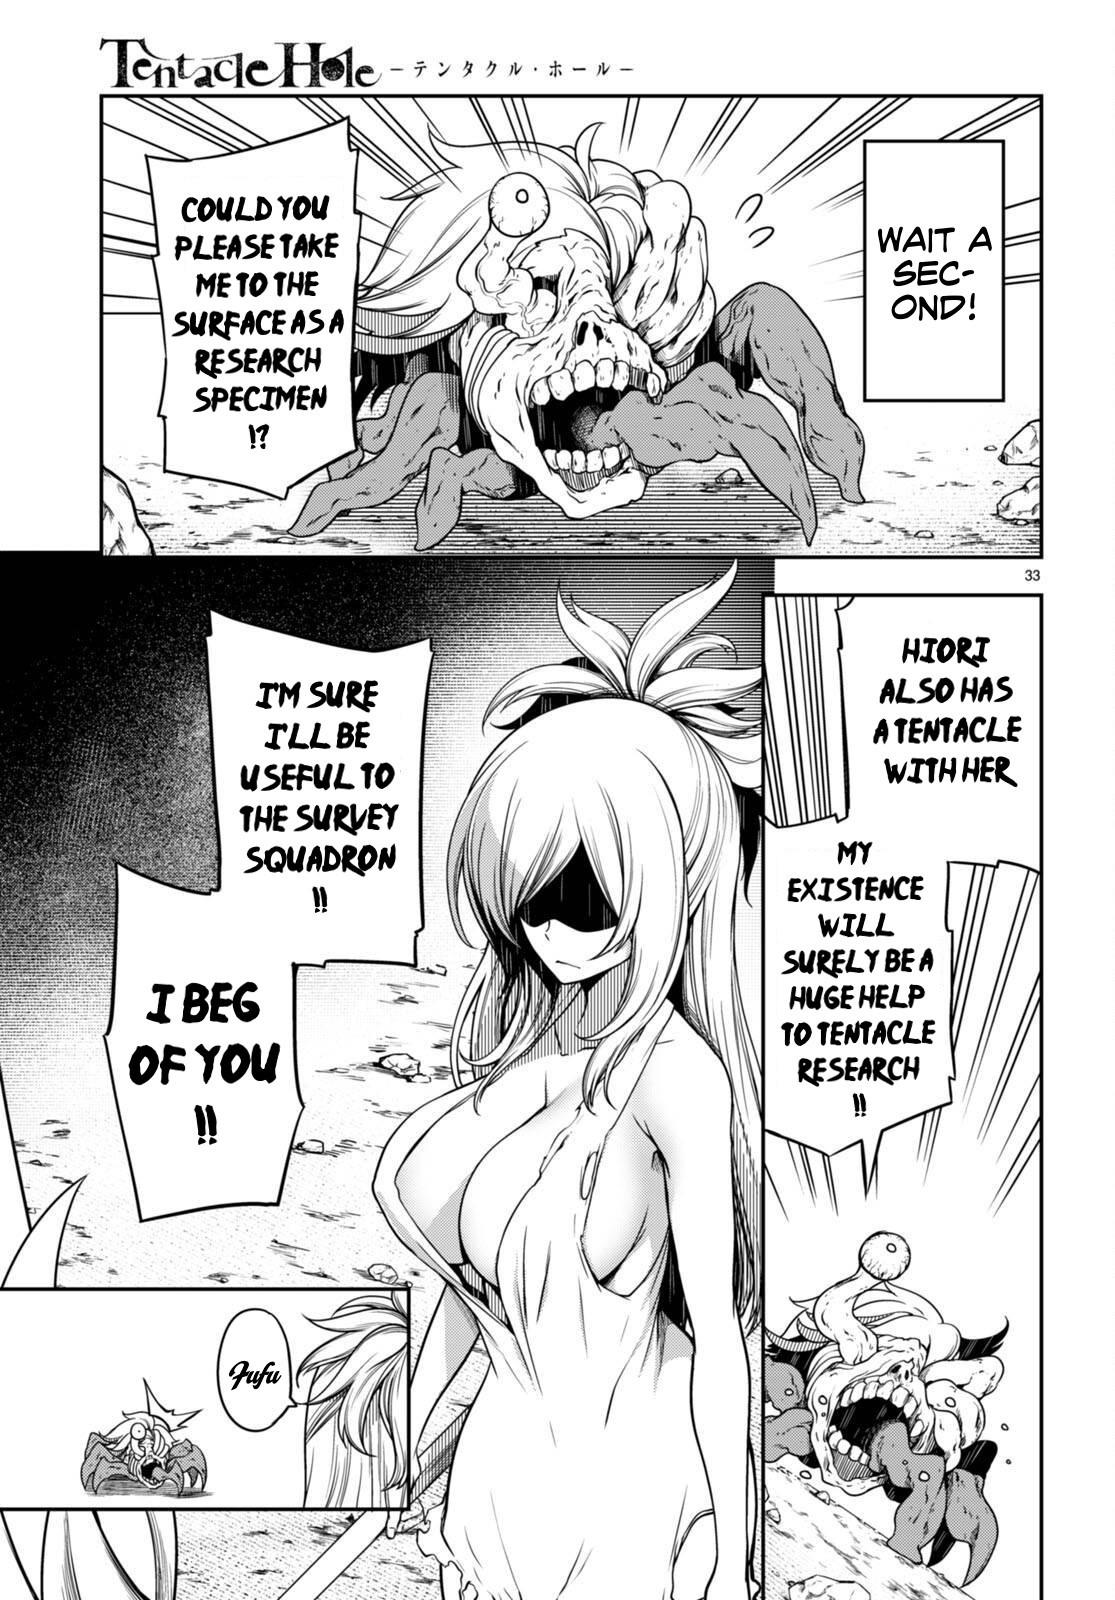 Tentacle Hole Chapter 13 32